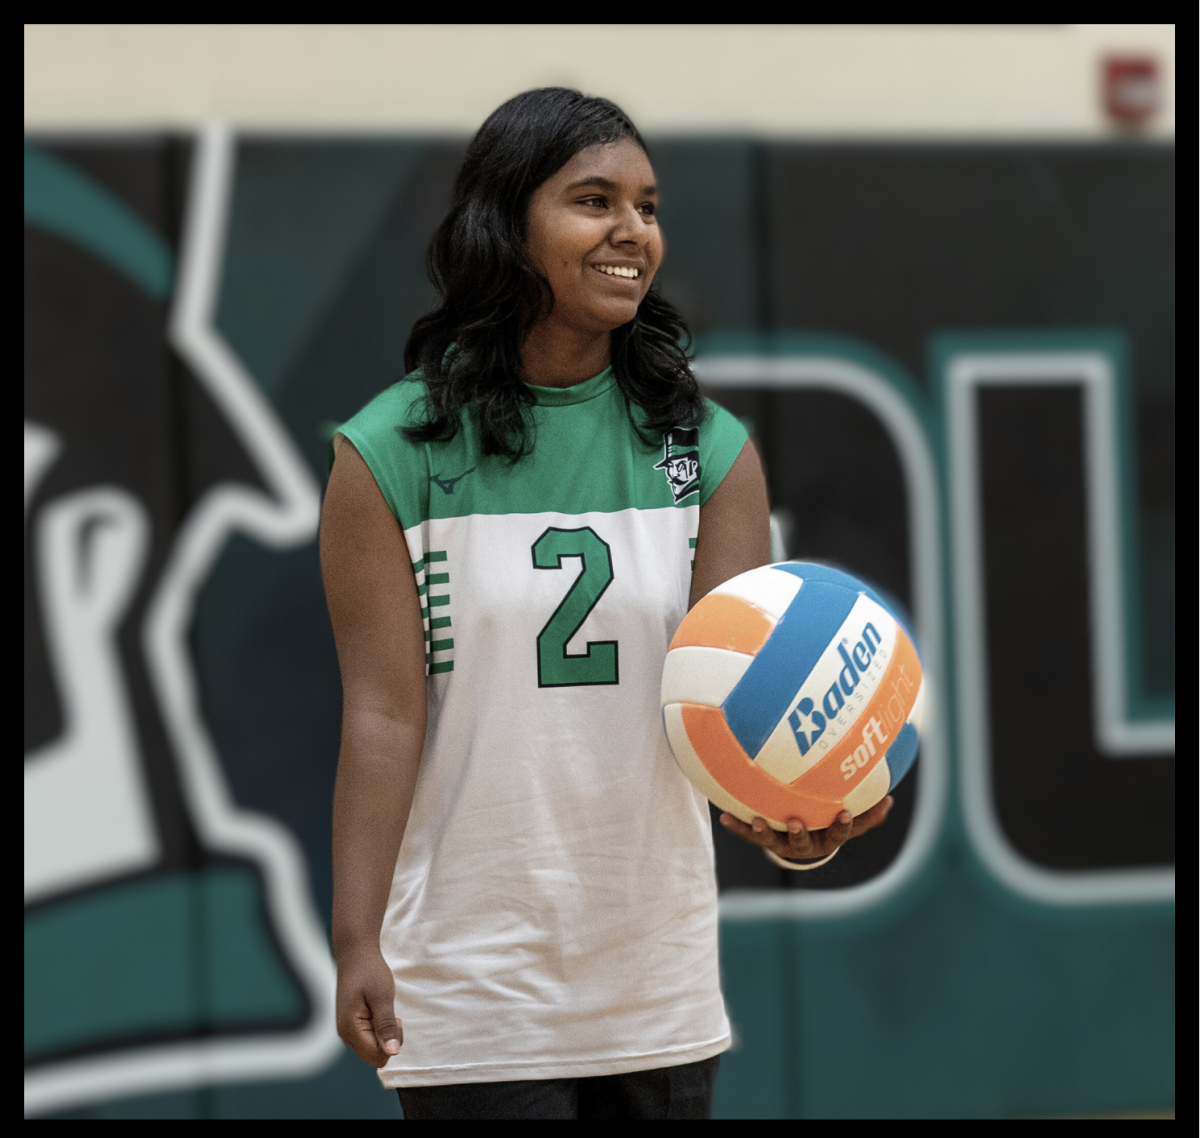 Grace Jyotishi is a sophomore who participates in a variety of activities at York. As a member of the Special Olympics team for multiple sports, she has had the opportunity to experience the unity that come with being a part of a team. She has found that through being involved in extracurriculars, she has formed many new friendships, providing her with a sense of community. She encourages others to do the same. “I play volleyball and basketball and through that I’ve built many friendships,” Jyotishi said.